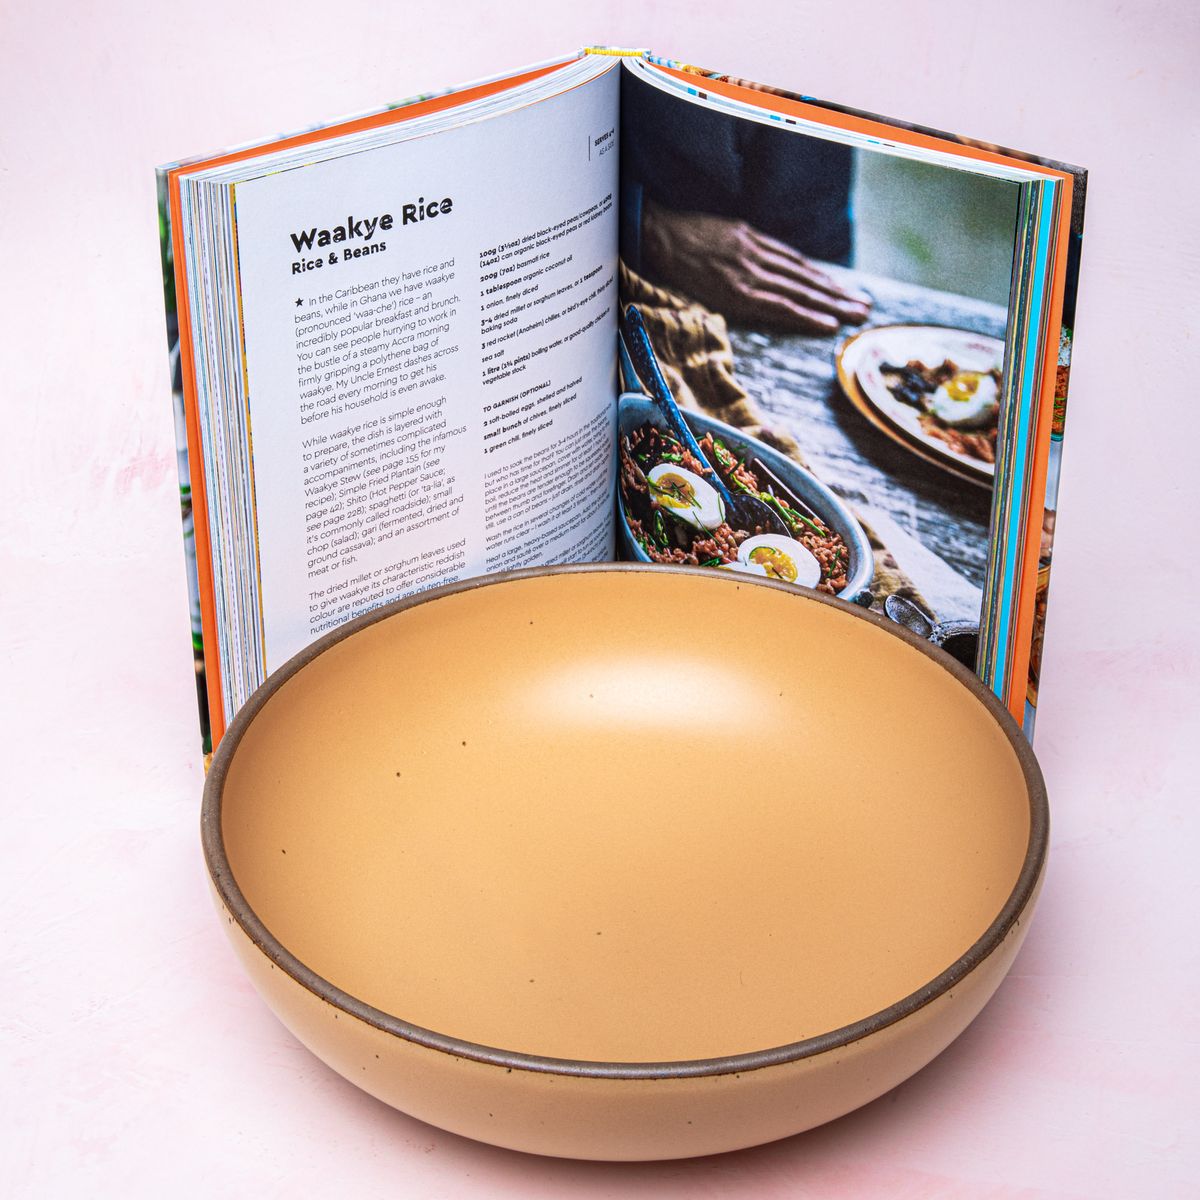 A large serving bowl in a peachy yellow color with an open book featuring a recipe and a close up look at a bowl of food